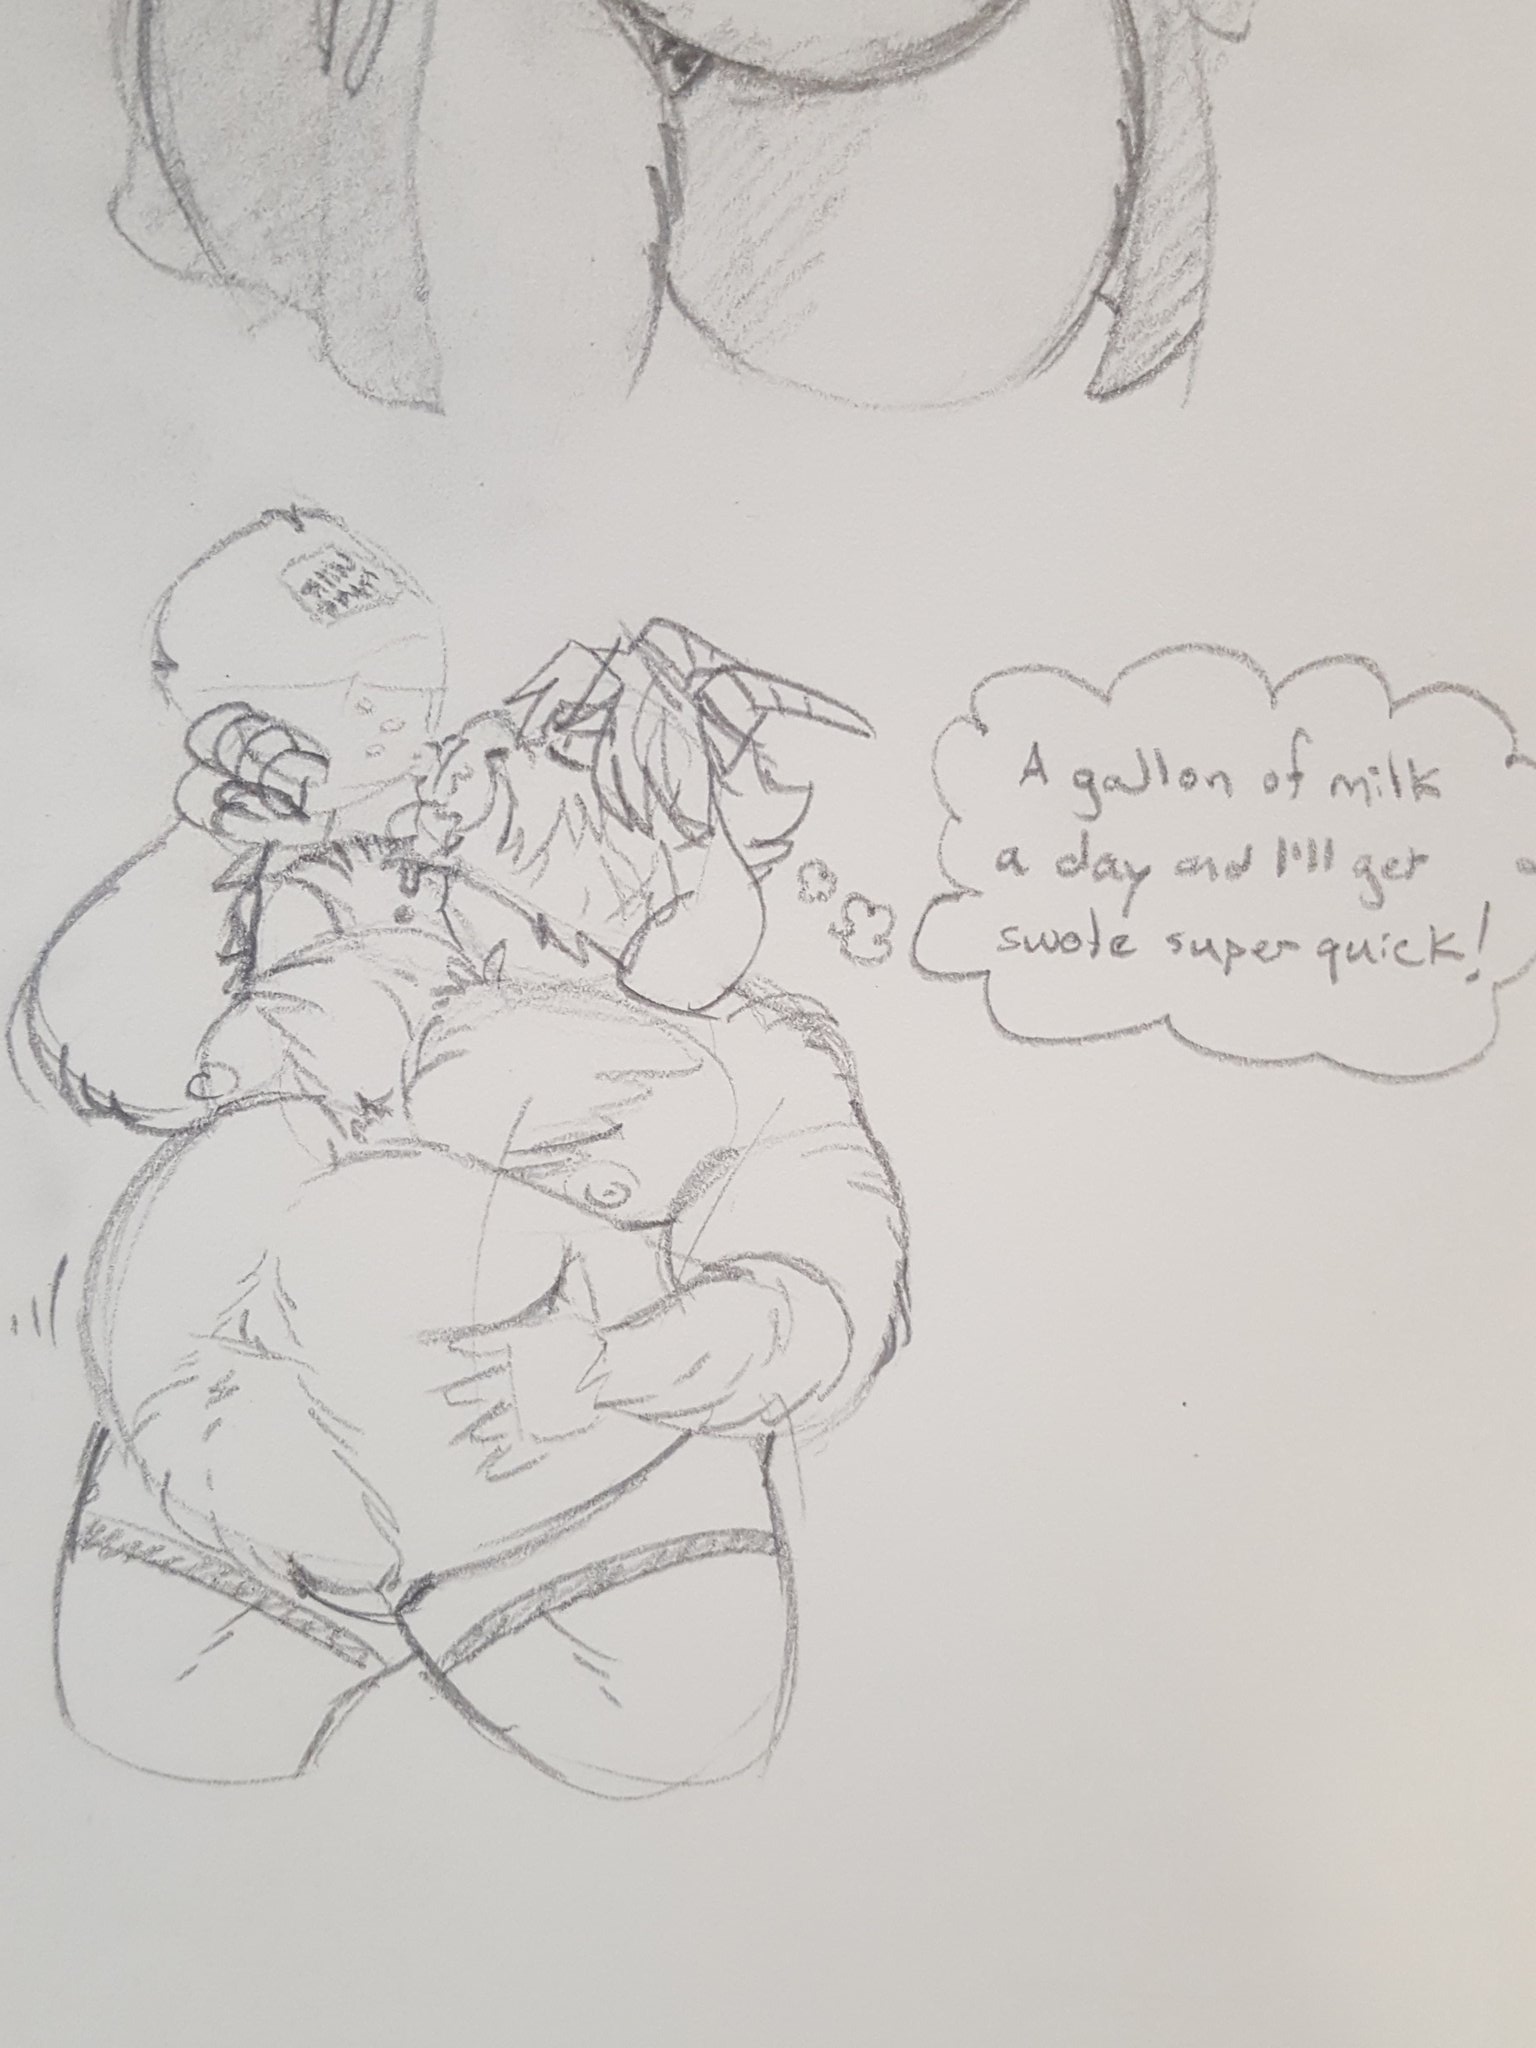 “Someone misinformed Asgore on milk's protein and fat content” .